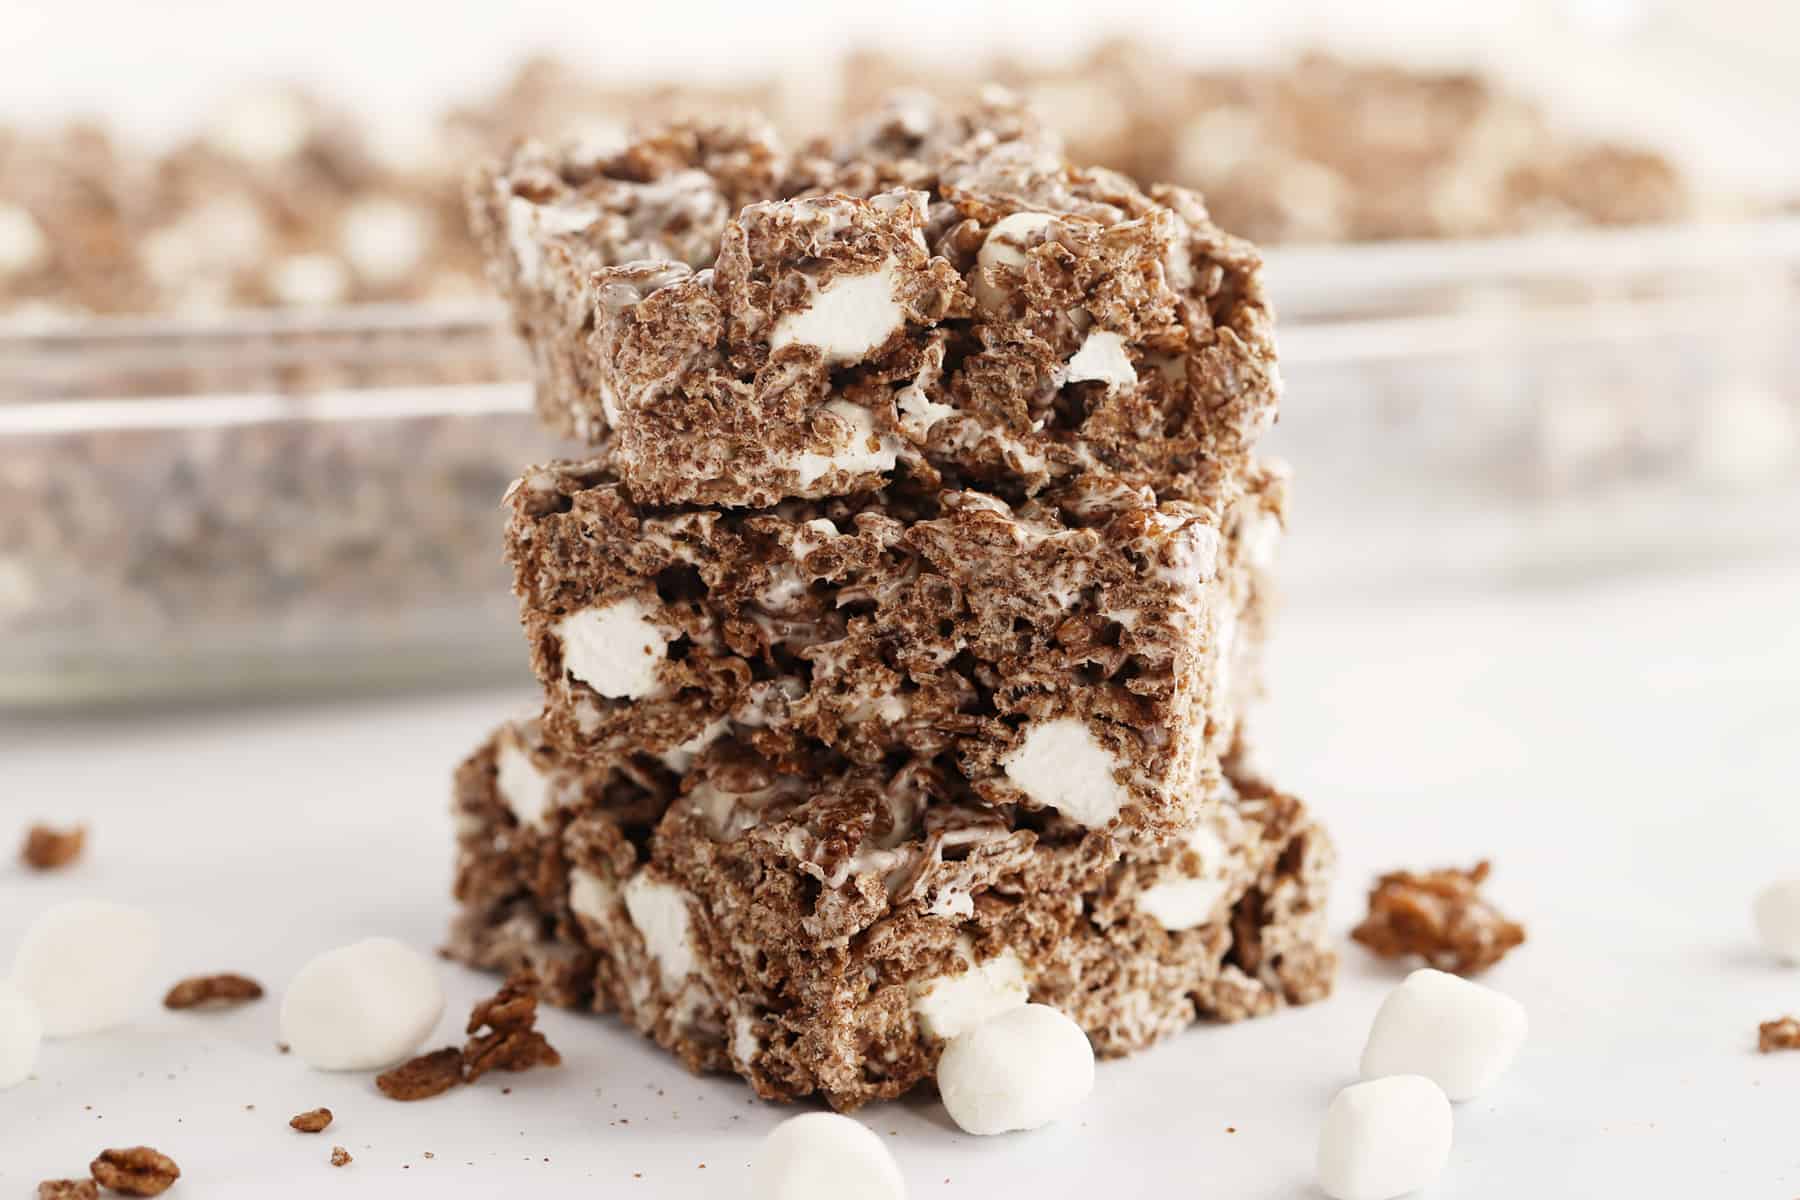 Chocolate Rice Krispies Treats cut and stacked on a tabletop.